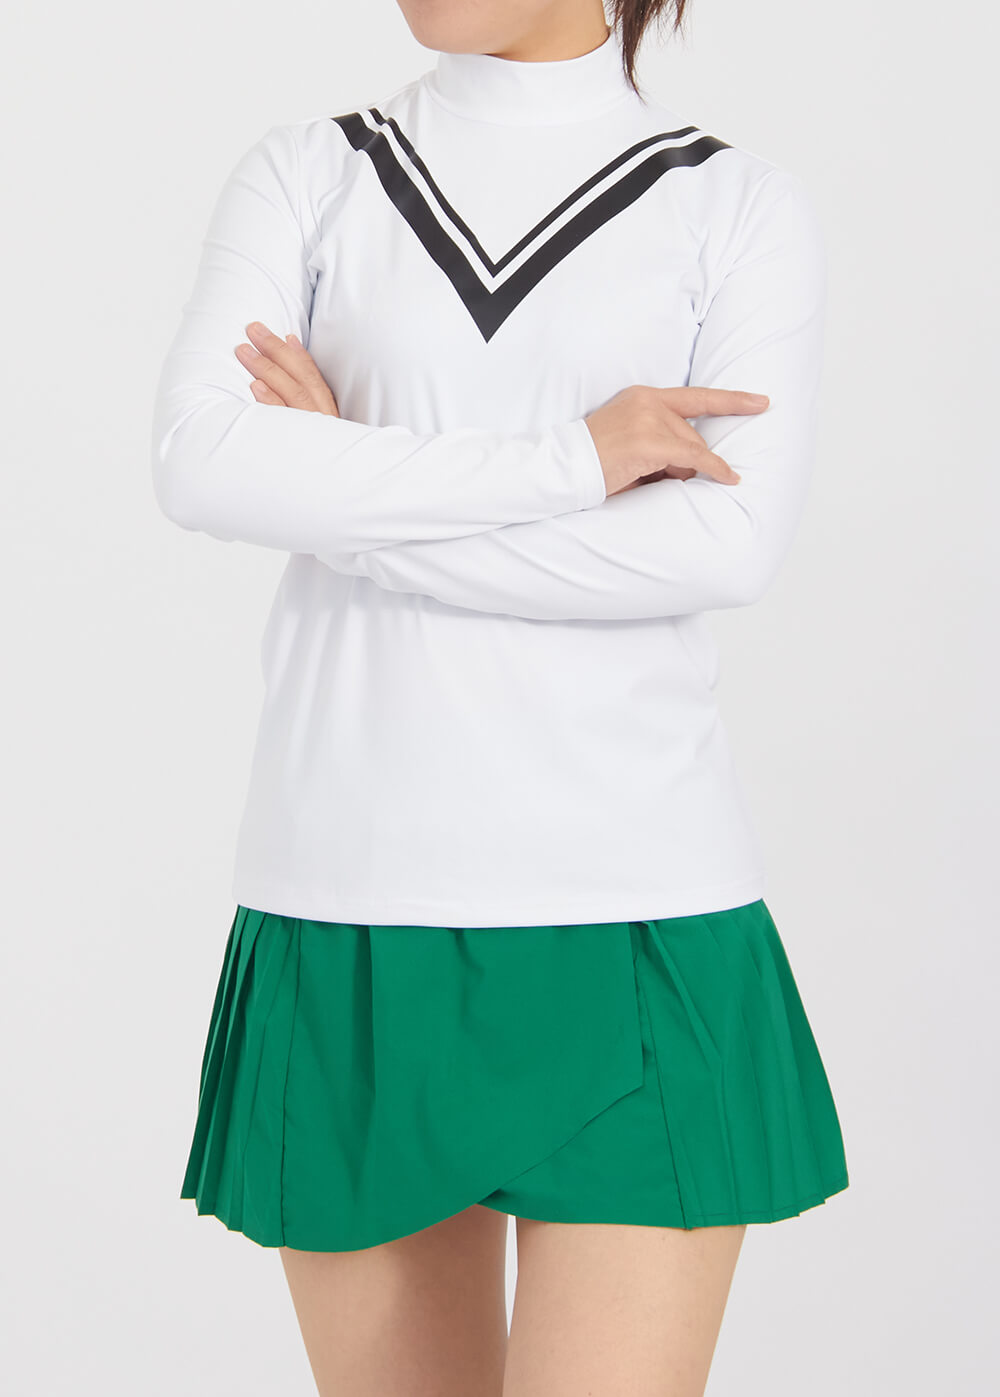 New Tennis Golf Clothing Sets Long Sleeves Top and Tennis Skirts